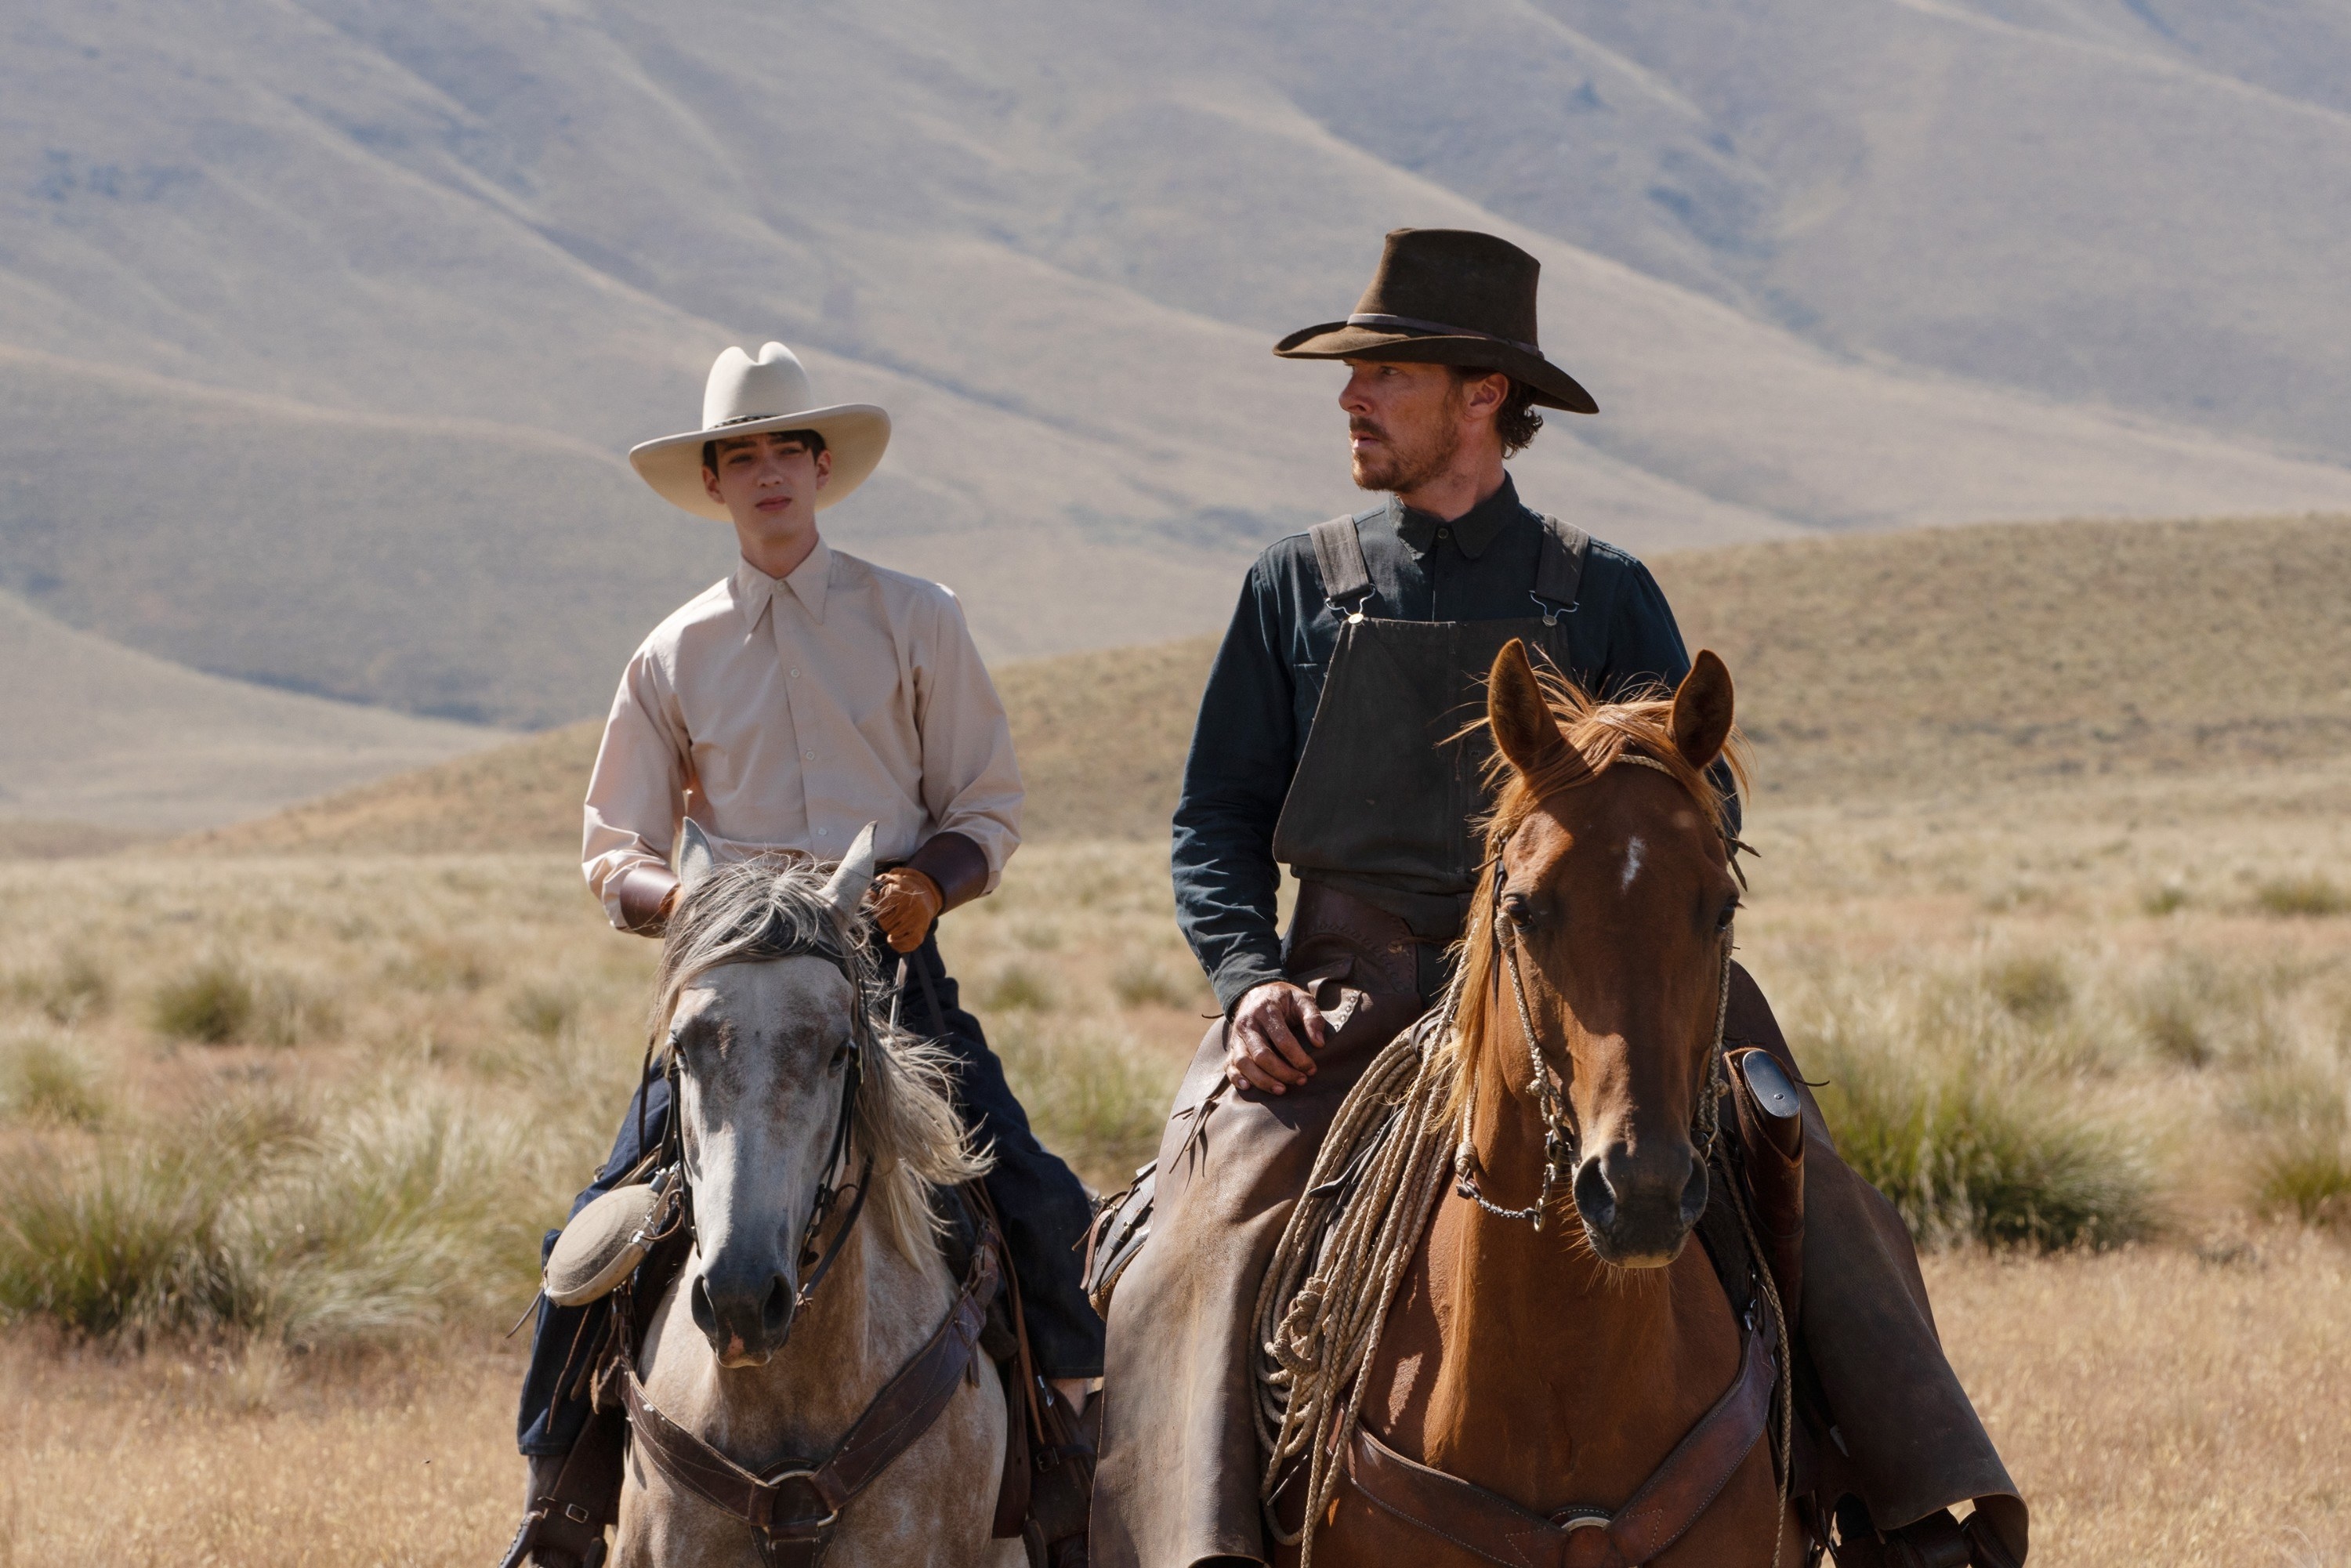 Benedict and Kodi Smit-McPhee ride horses together in a scene from the film